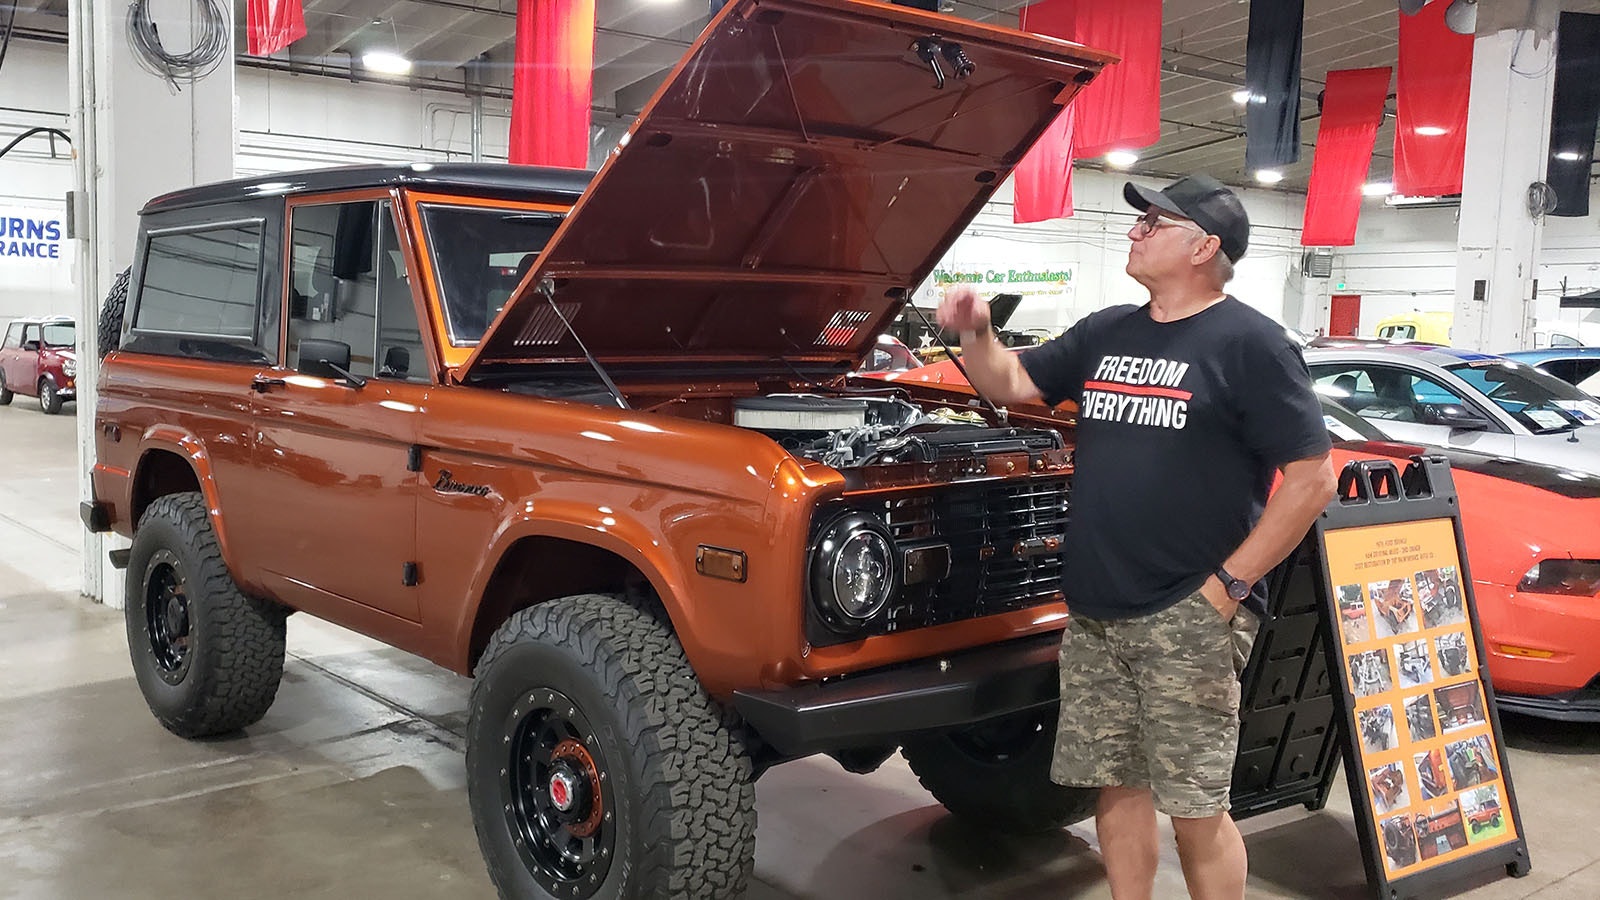 Craig Rood and his 1976 Ford Bronco.